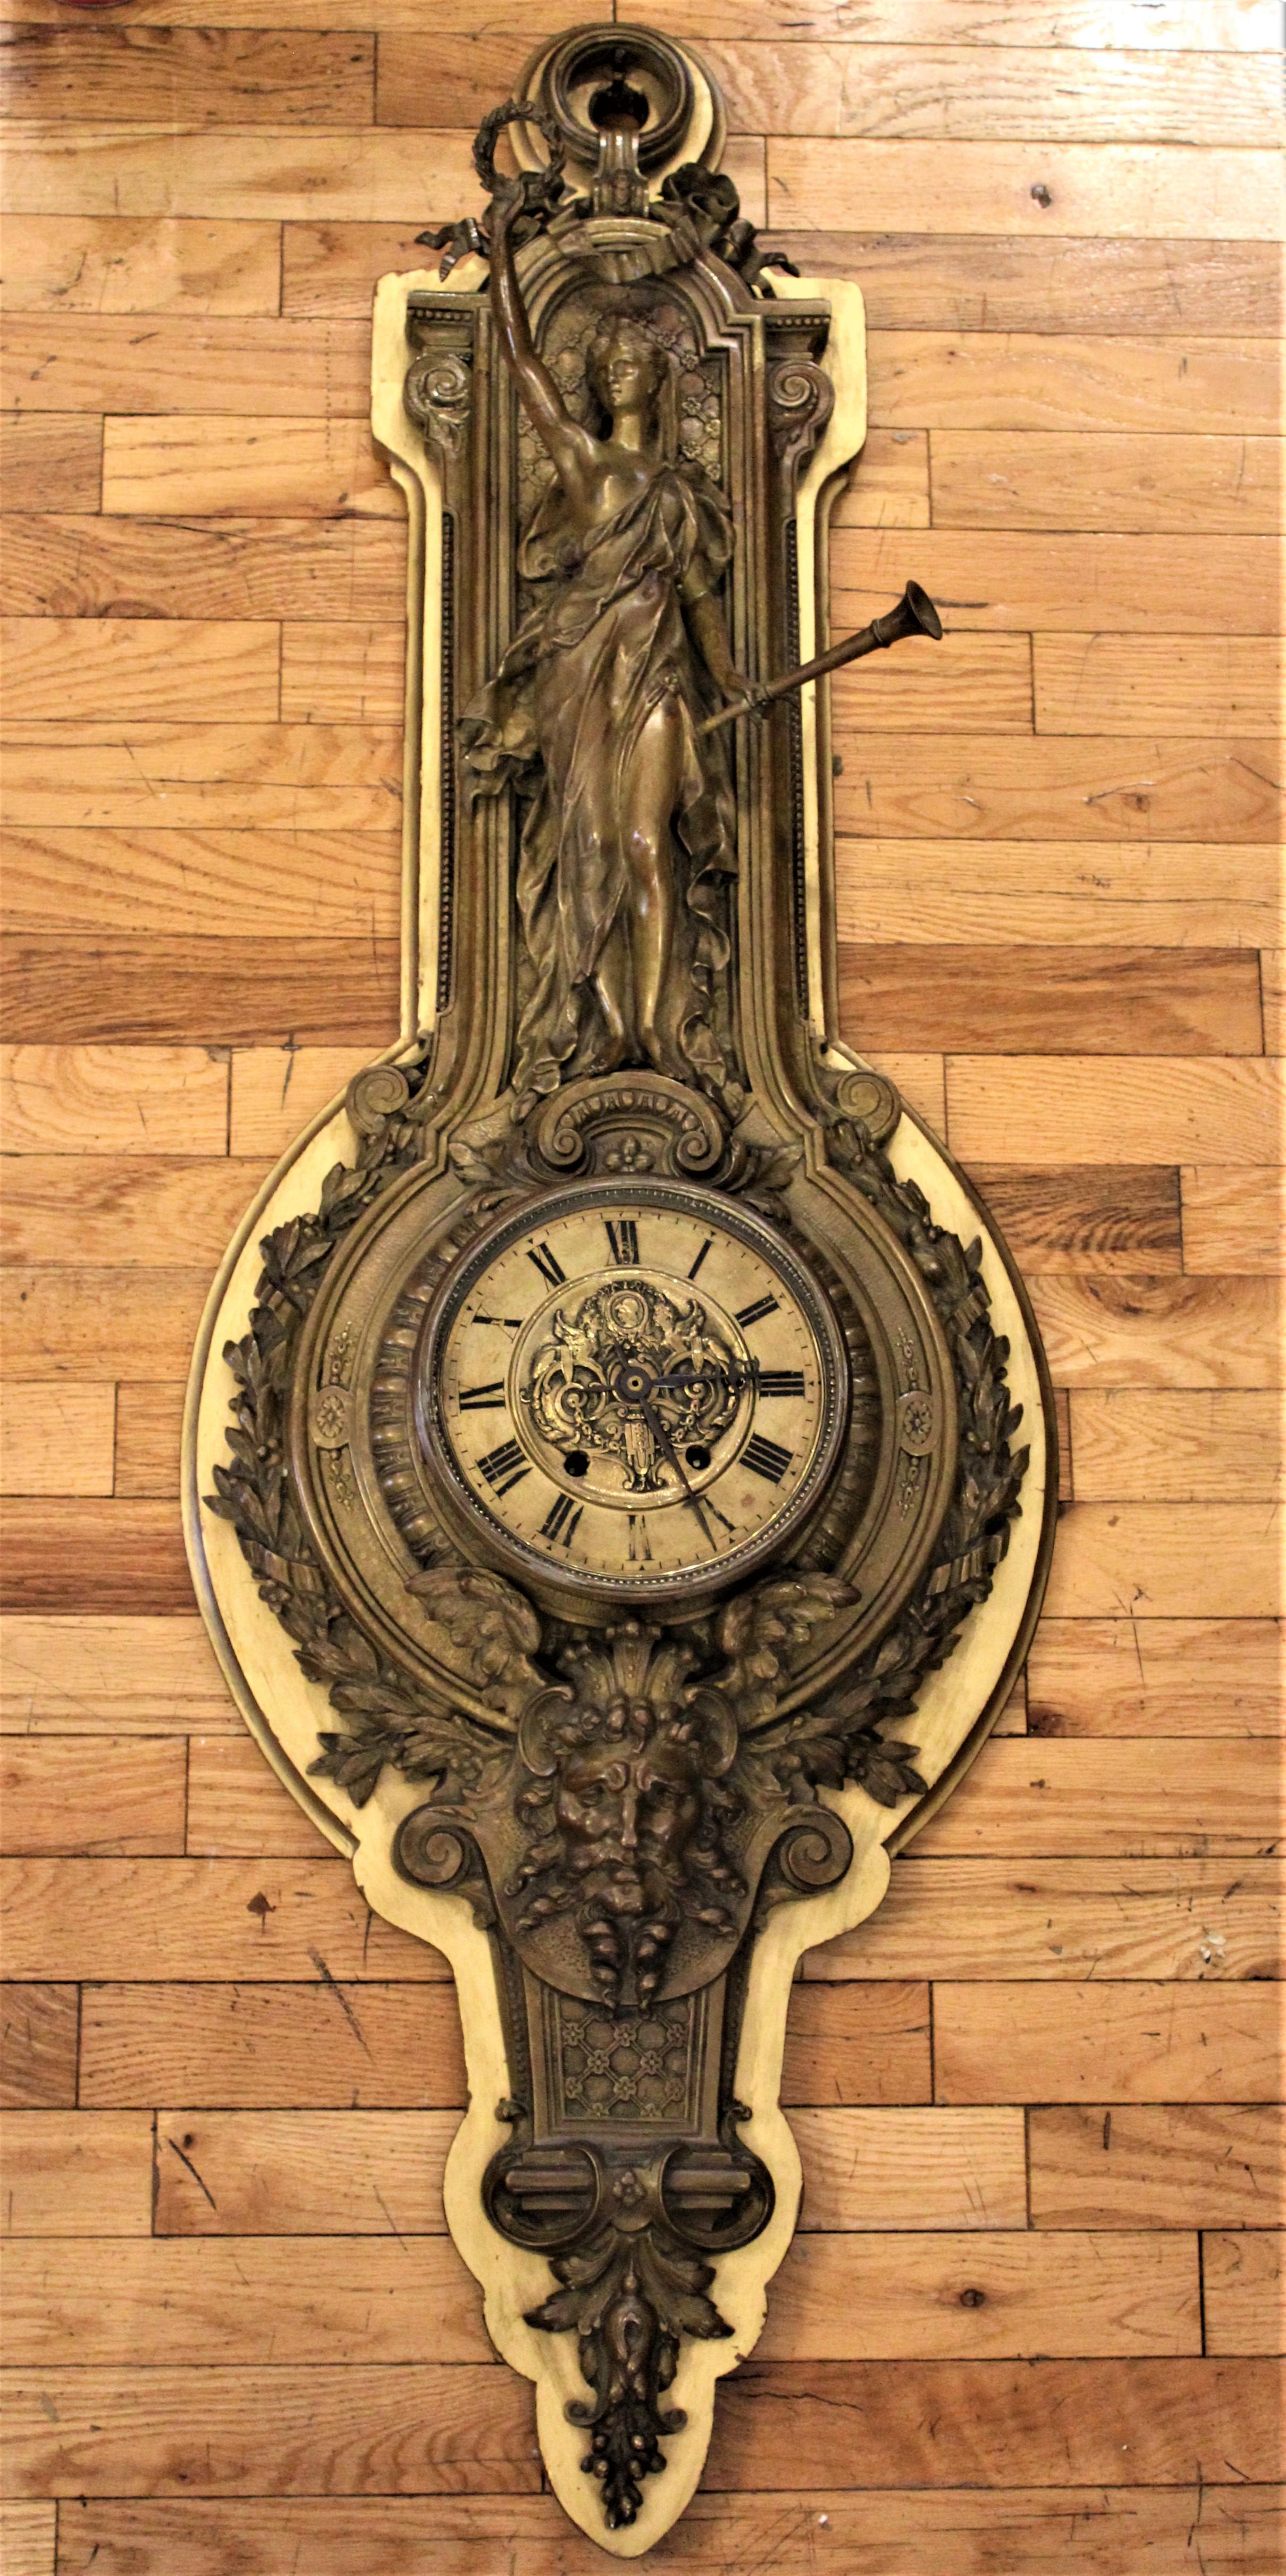 Signed Tiffany & Co. antique Victorian solid bronze French wall clock with an elaborate figural cast bronze case depicting at the top, a maiden holding a wreath from an outstretched hand, and a trumpet in the other. Under the clock's movement itself